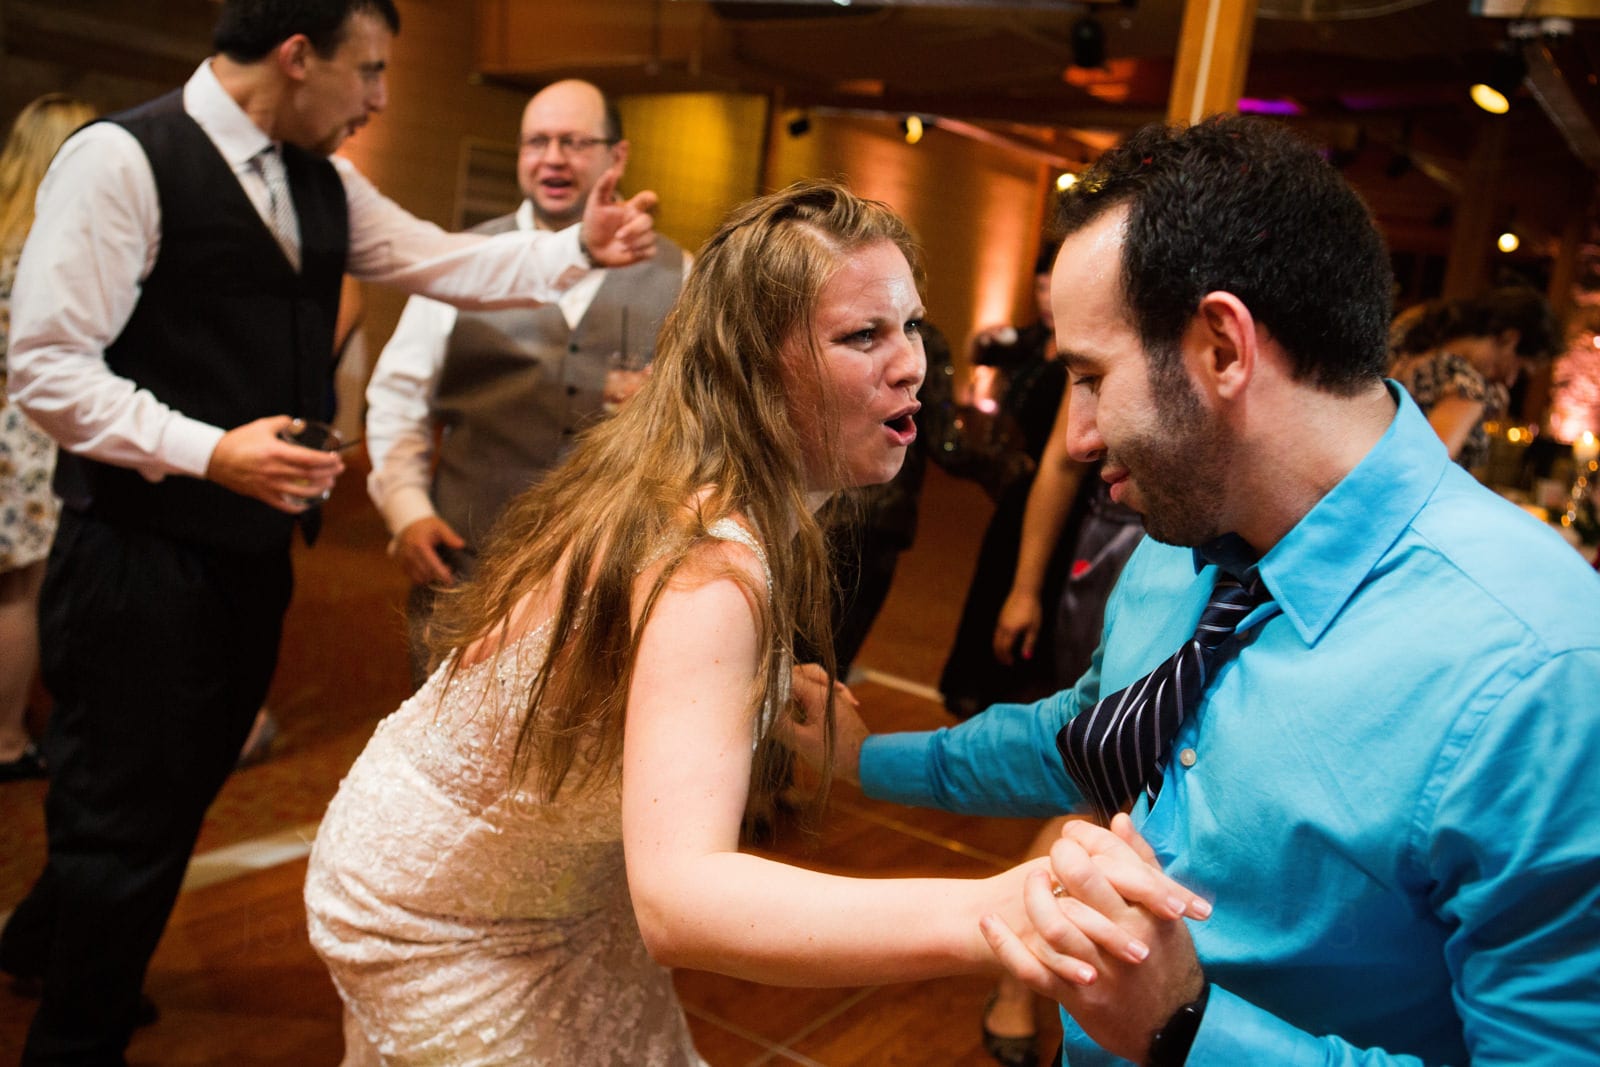 A bride makes a funny expression as she dances with a male guest in a bright blue shirt during her fall wedding at Seven Springs.